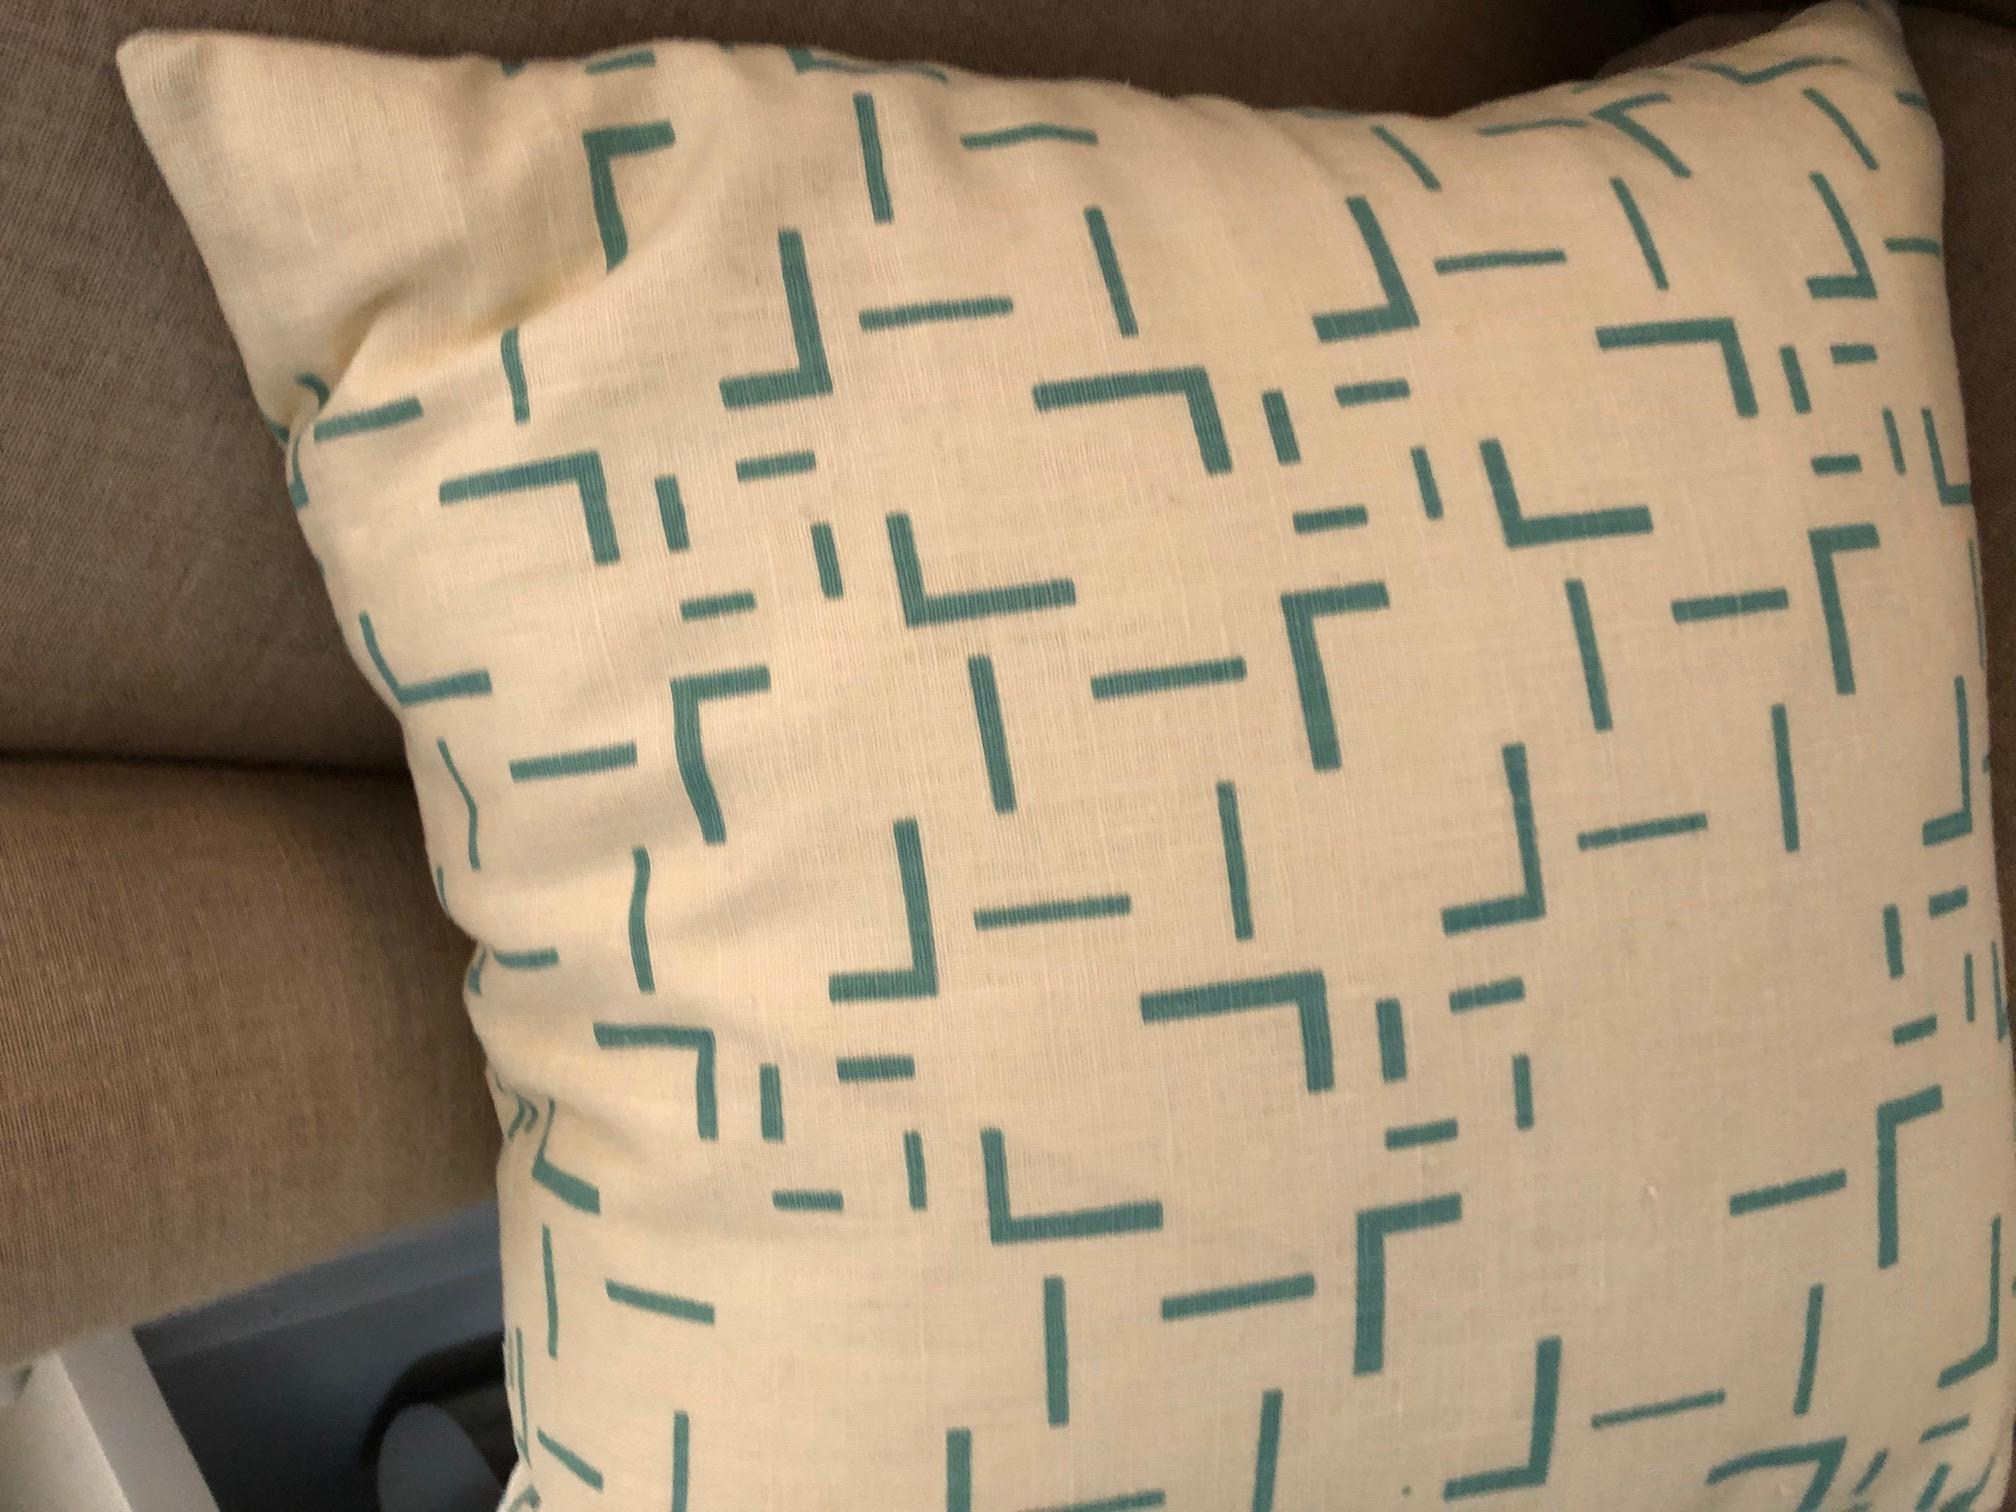 From the Sibilla Patrizi collection, this simple teal color geometric is silk screened on raw silk, has a poly/dac insert. Design appears on reverse side as well. Total of 2 available. Made in USA.